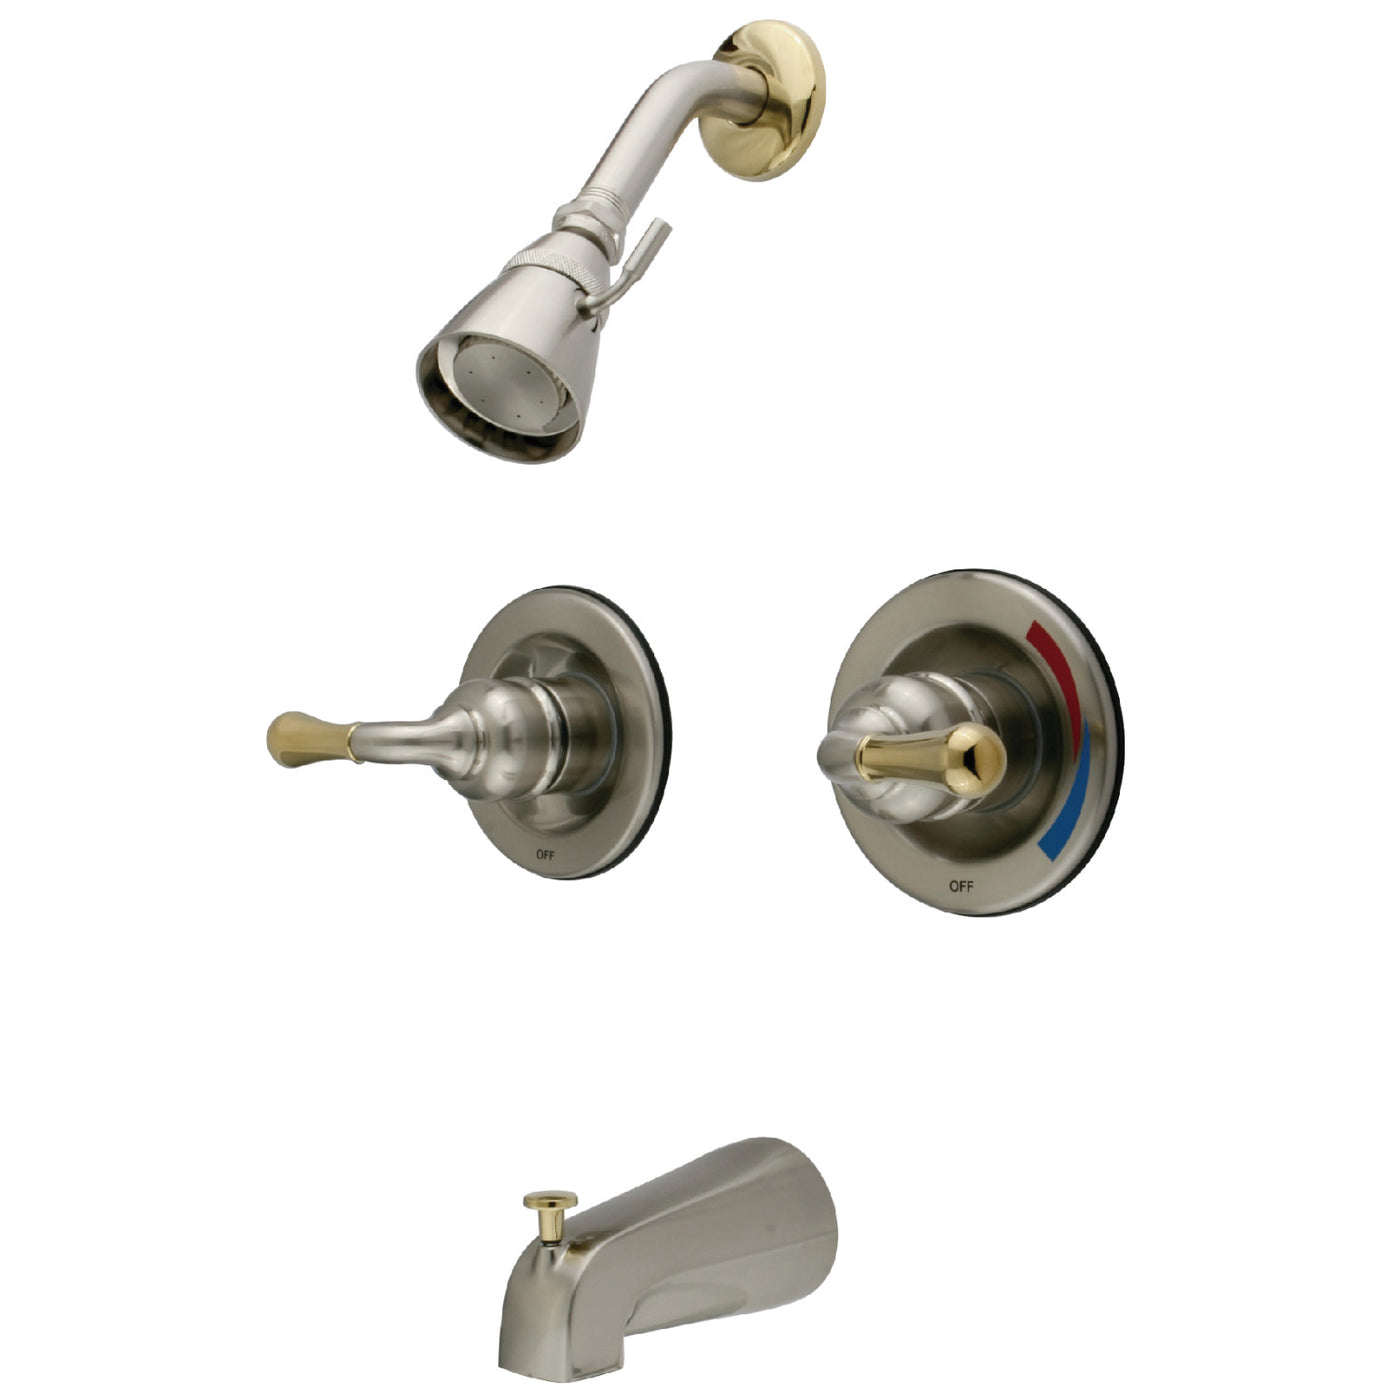 Elements of Design EB679 Two-Handle Pressure Balanced Tub and Shower Faucet, Brushed Nickel/Polished Brass